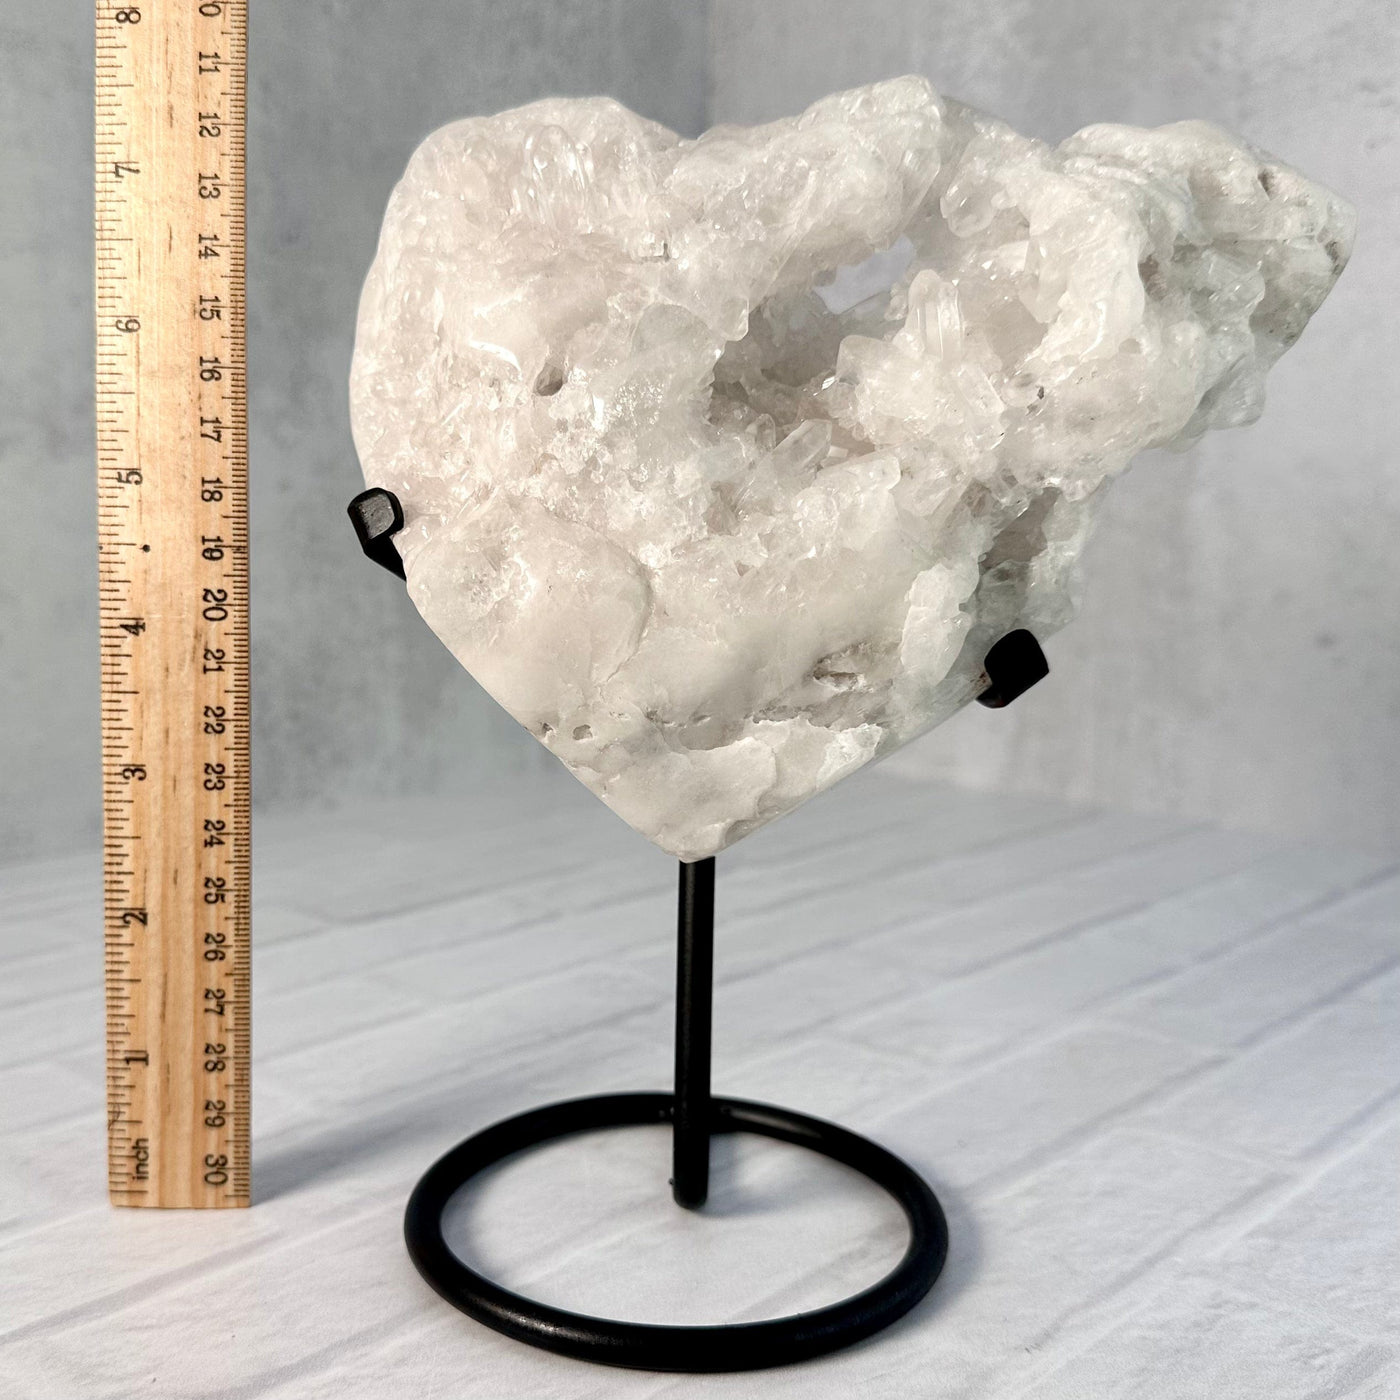 Frontal view of Crystal Quartz Cluster Heart on Metal Stand next to a ruler for size reference.